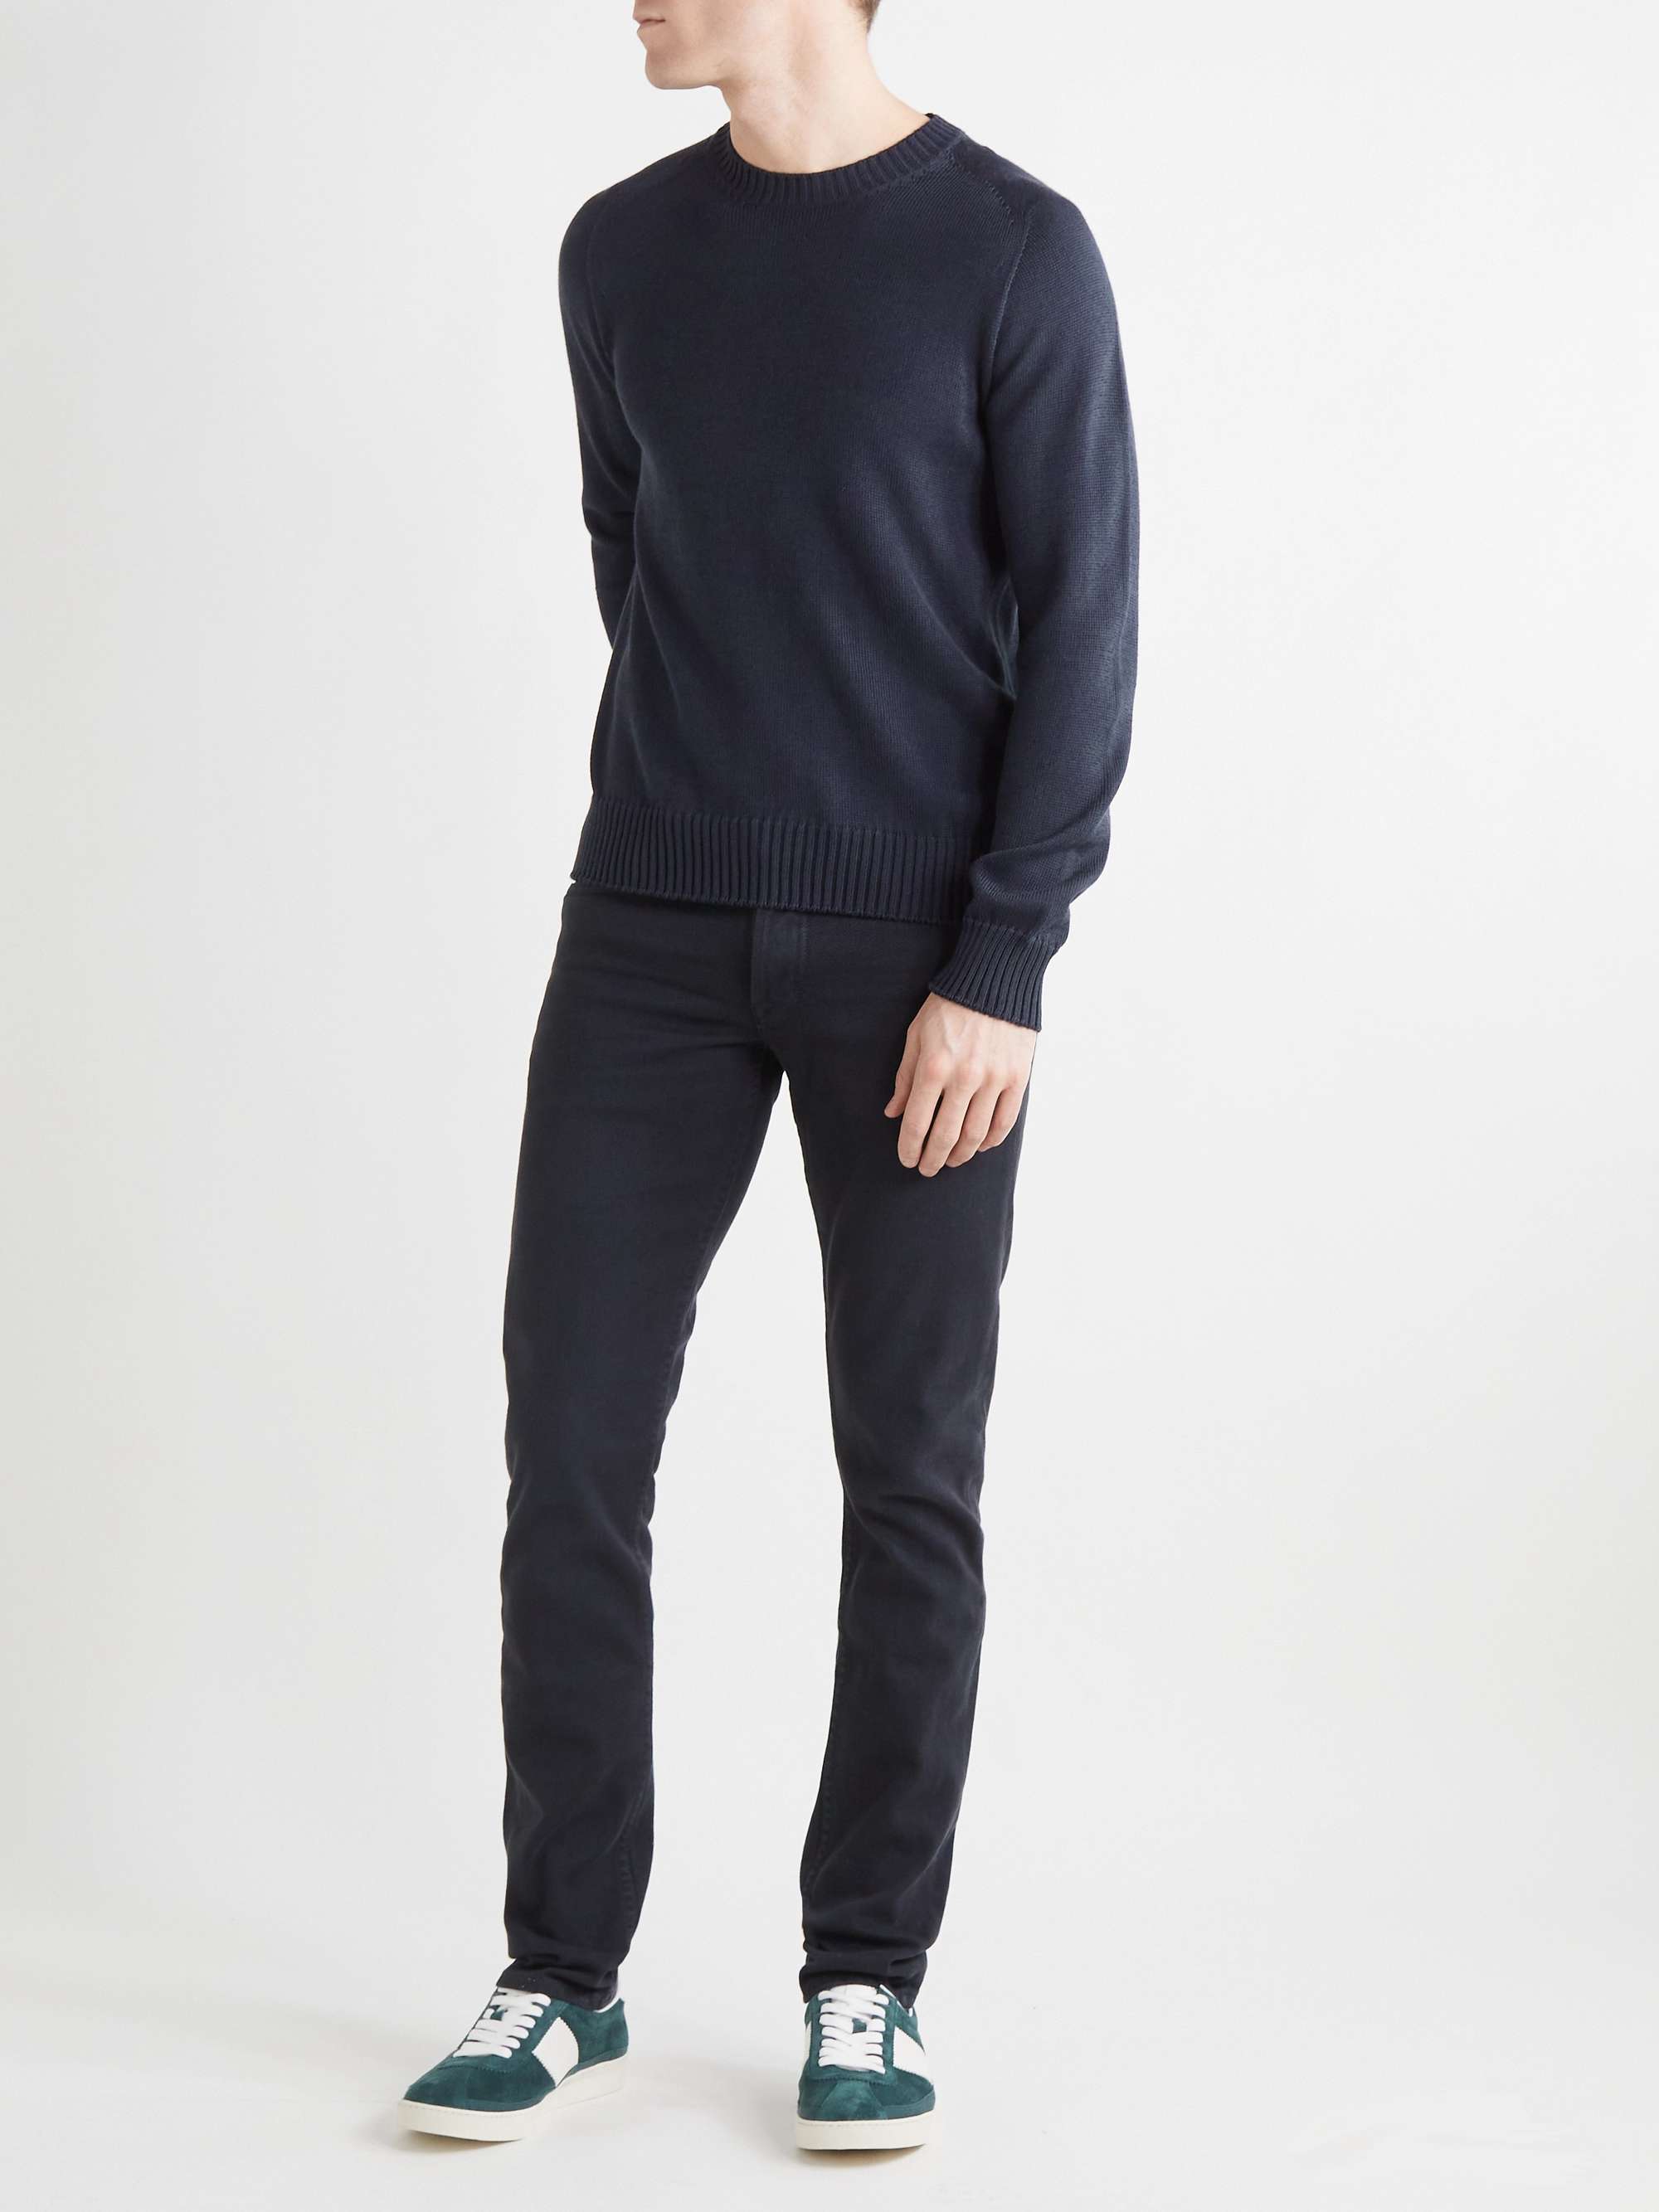 TOM FORD Cotton and Silk-Blend Sweater | MR PORTER